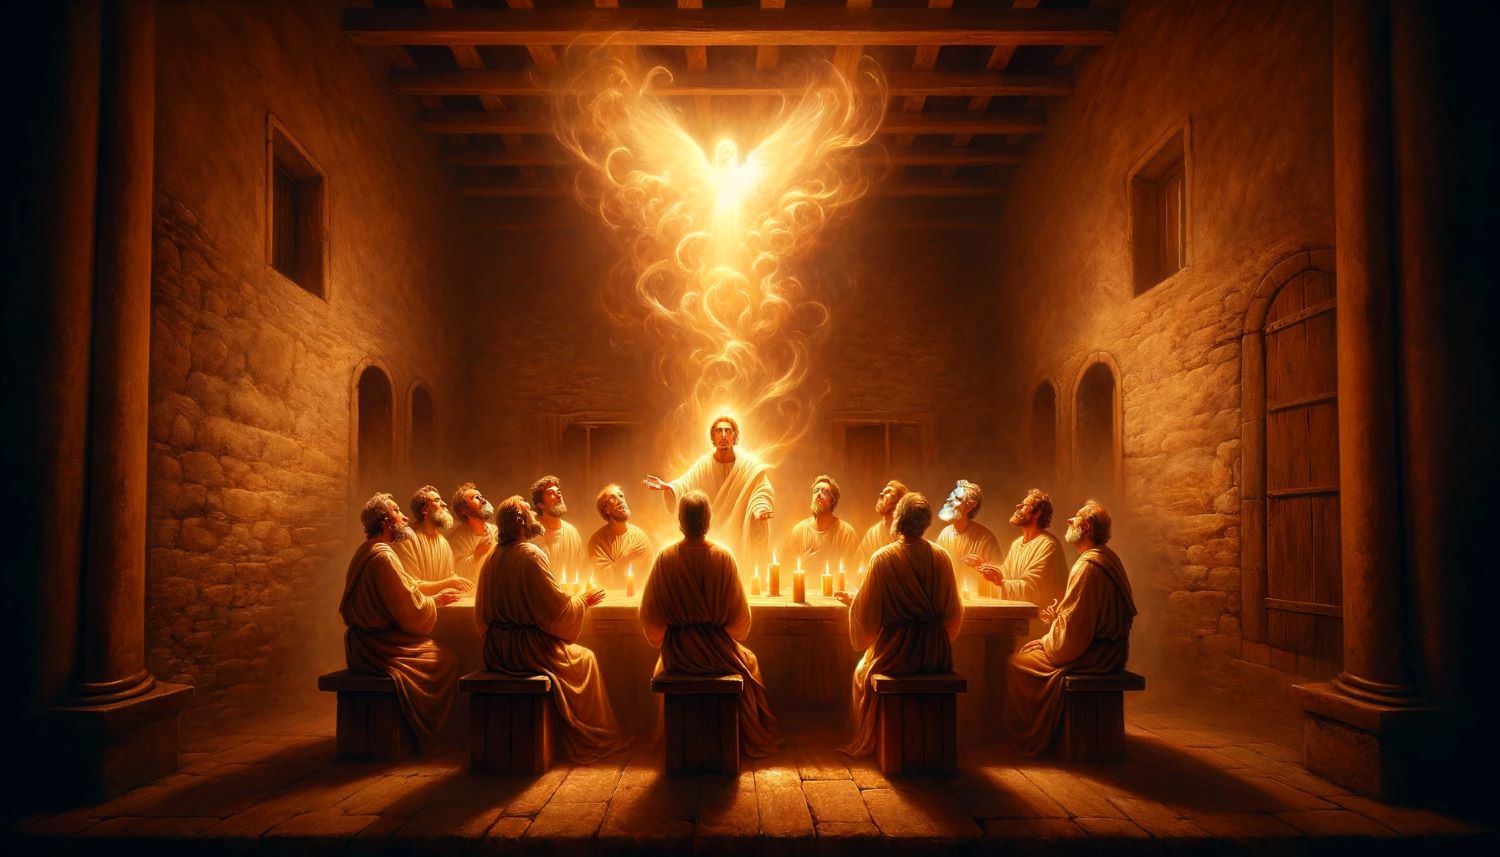 How Did The Coming Of The Holy Spirit Affect The Apostles?